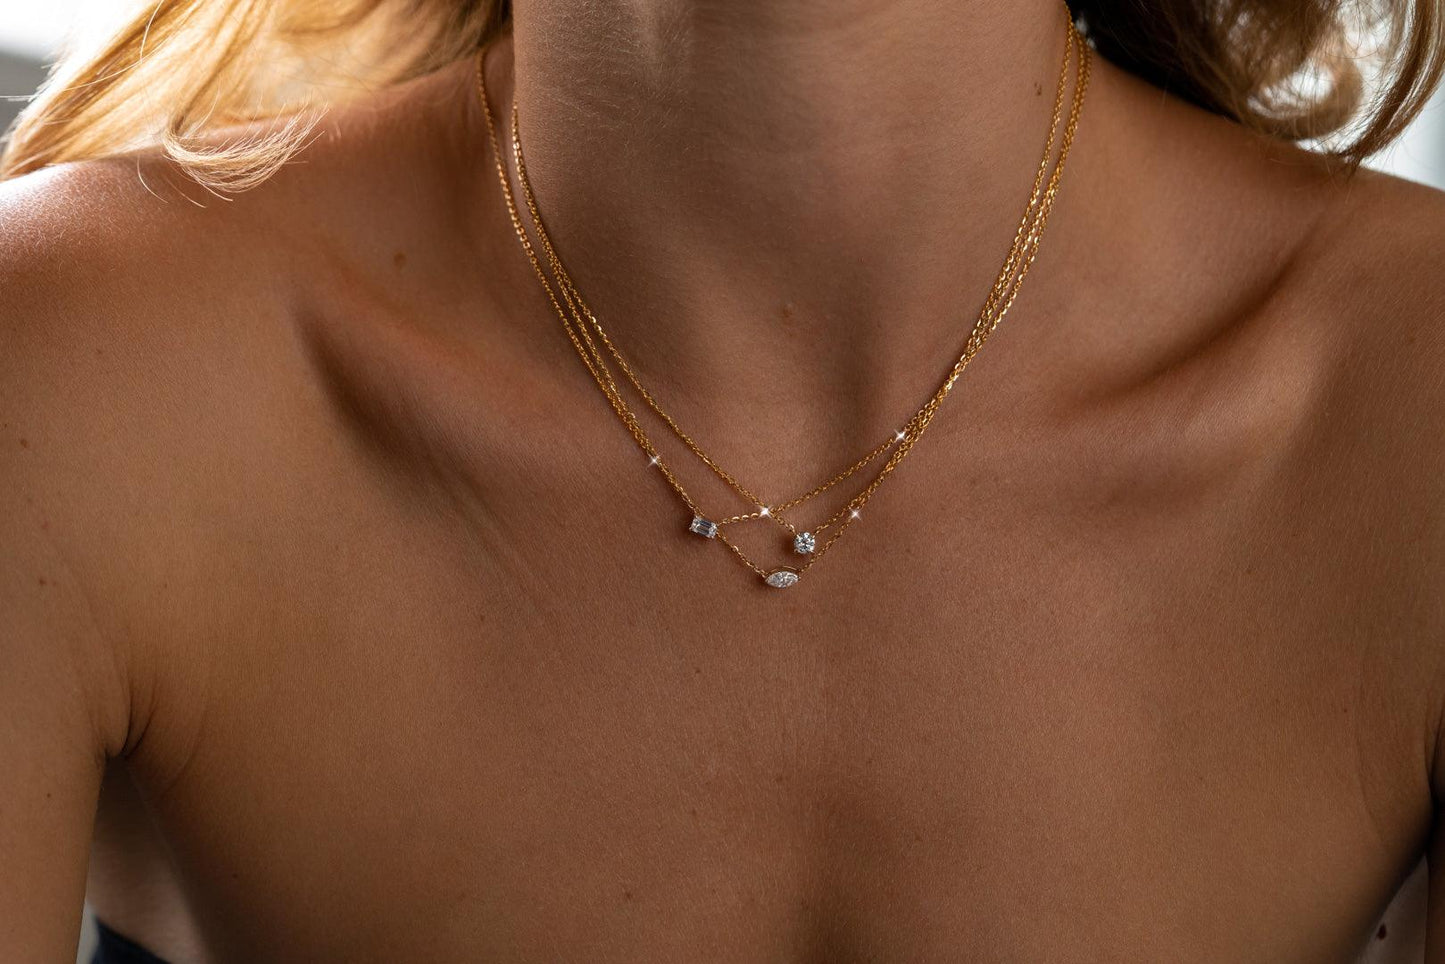 The Eve Yellow Gold 0.3ct Marquise Cultured Diamond Necklace